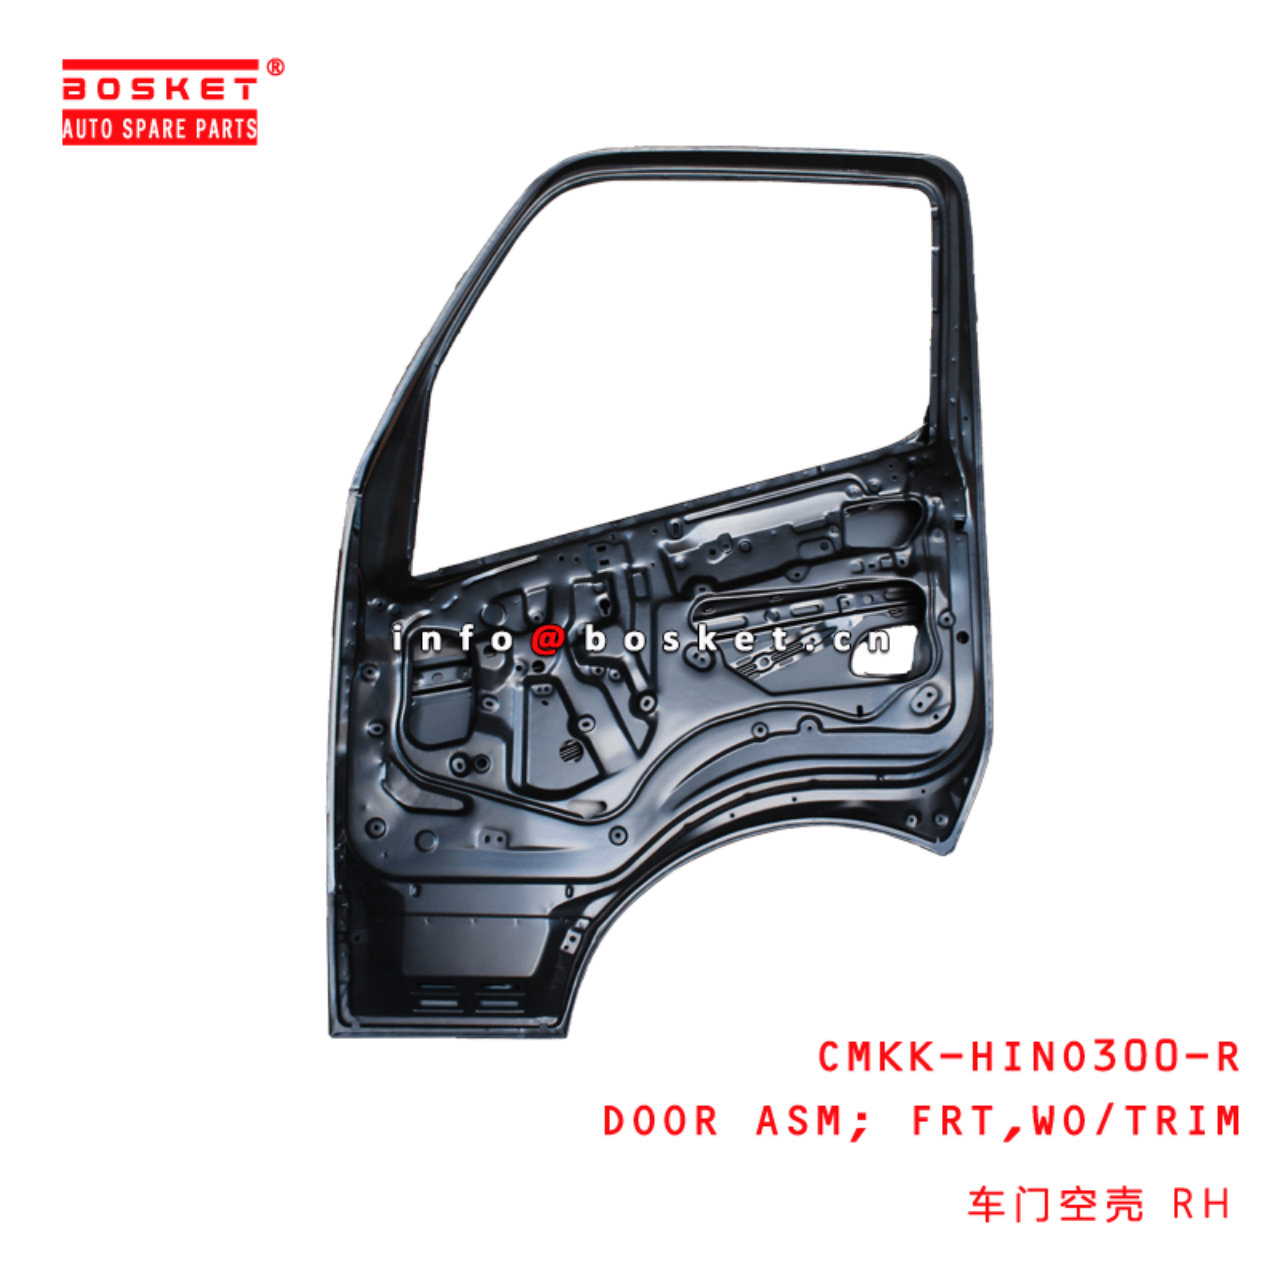 CMKK-HINO300-R Trim Front Door Assembly Without Suitable For HINO 300 